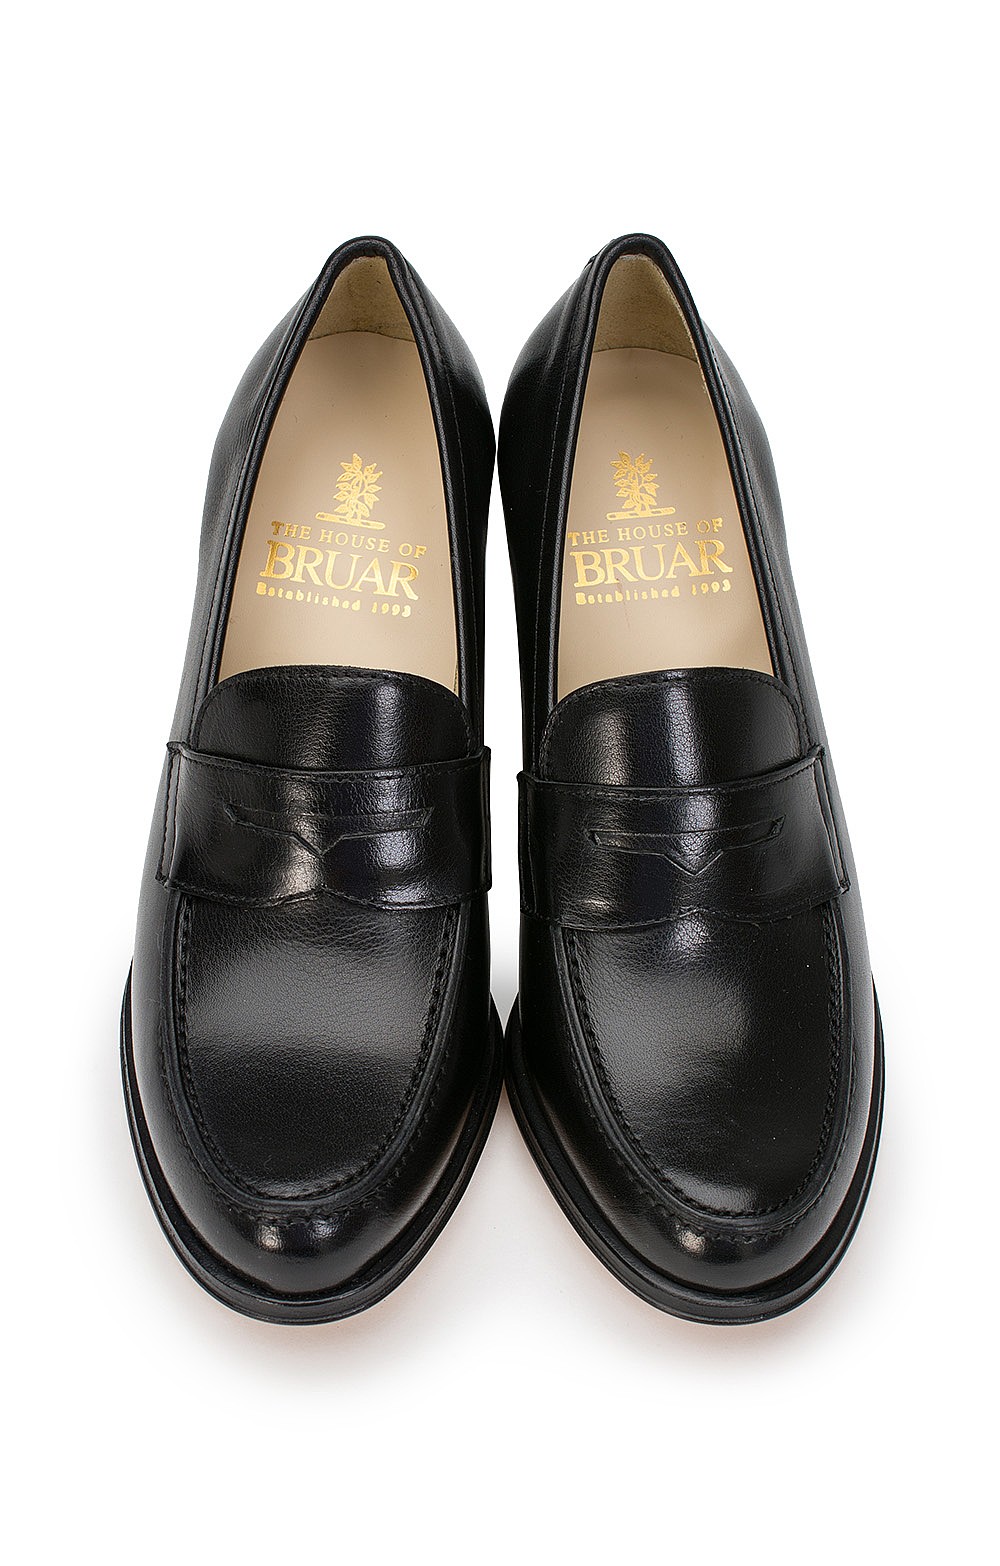 high heel penny loafers